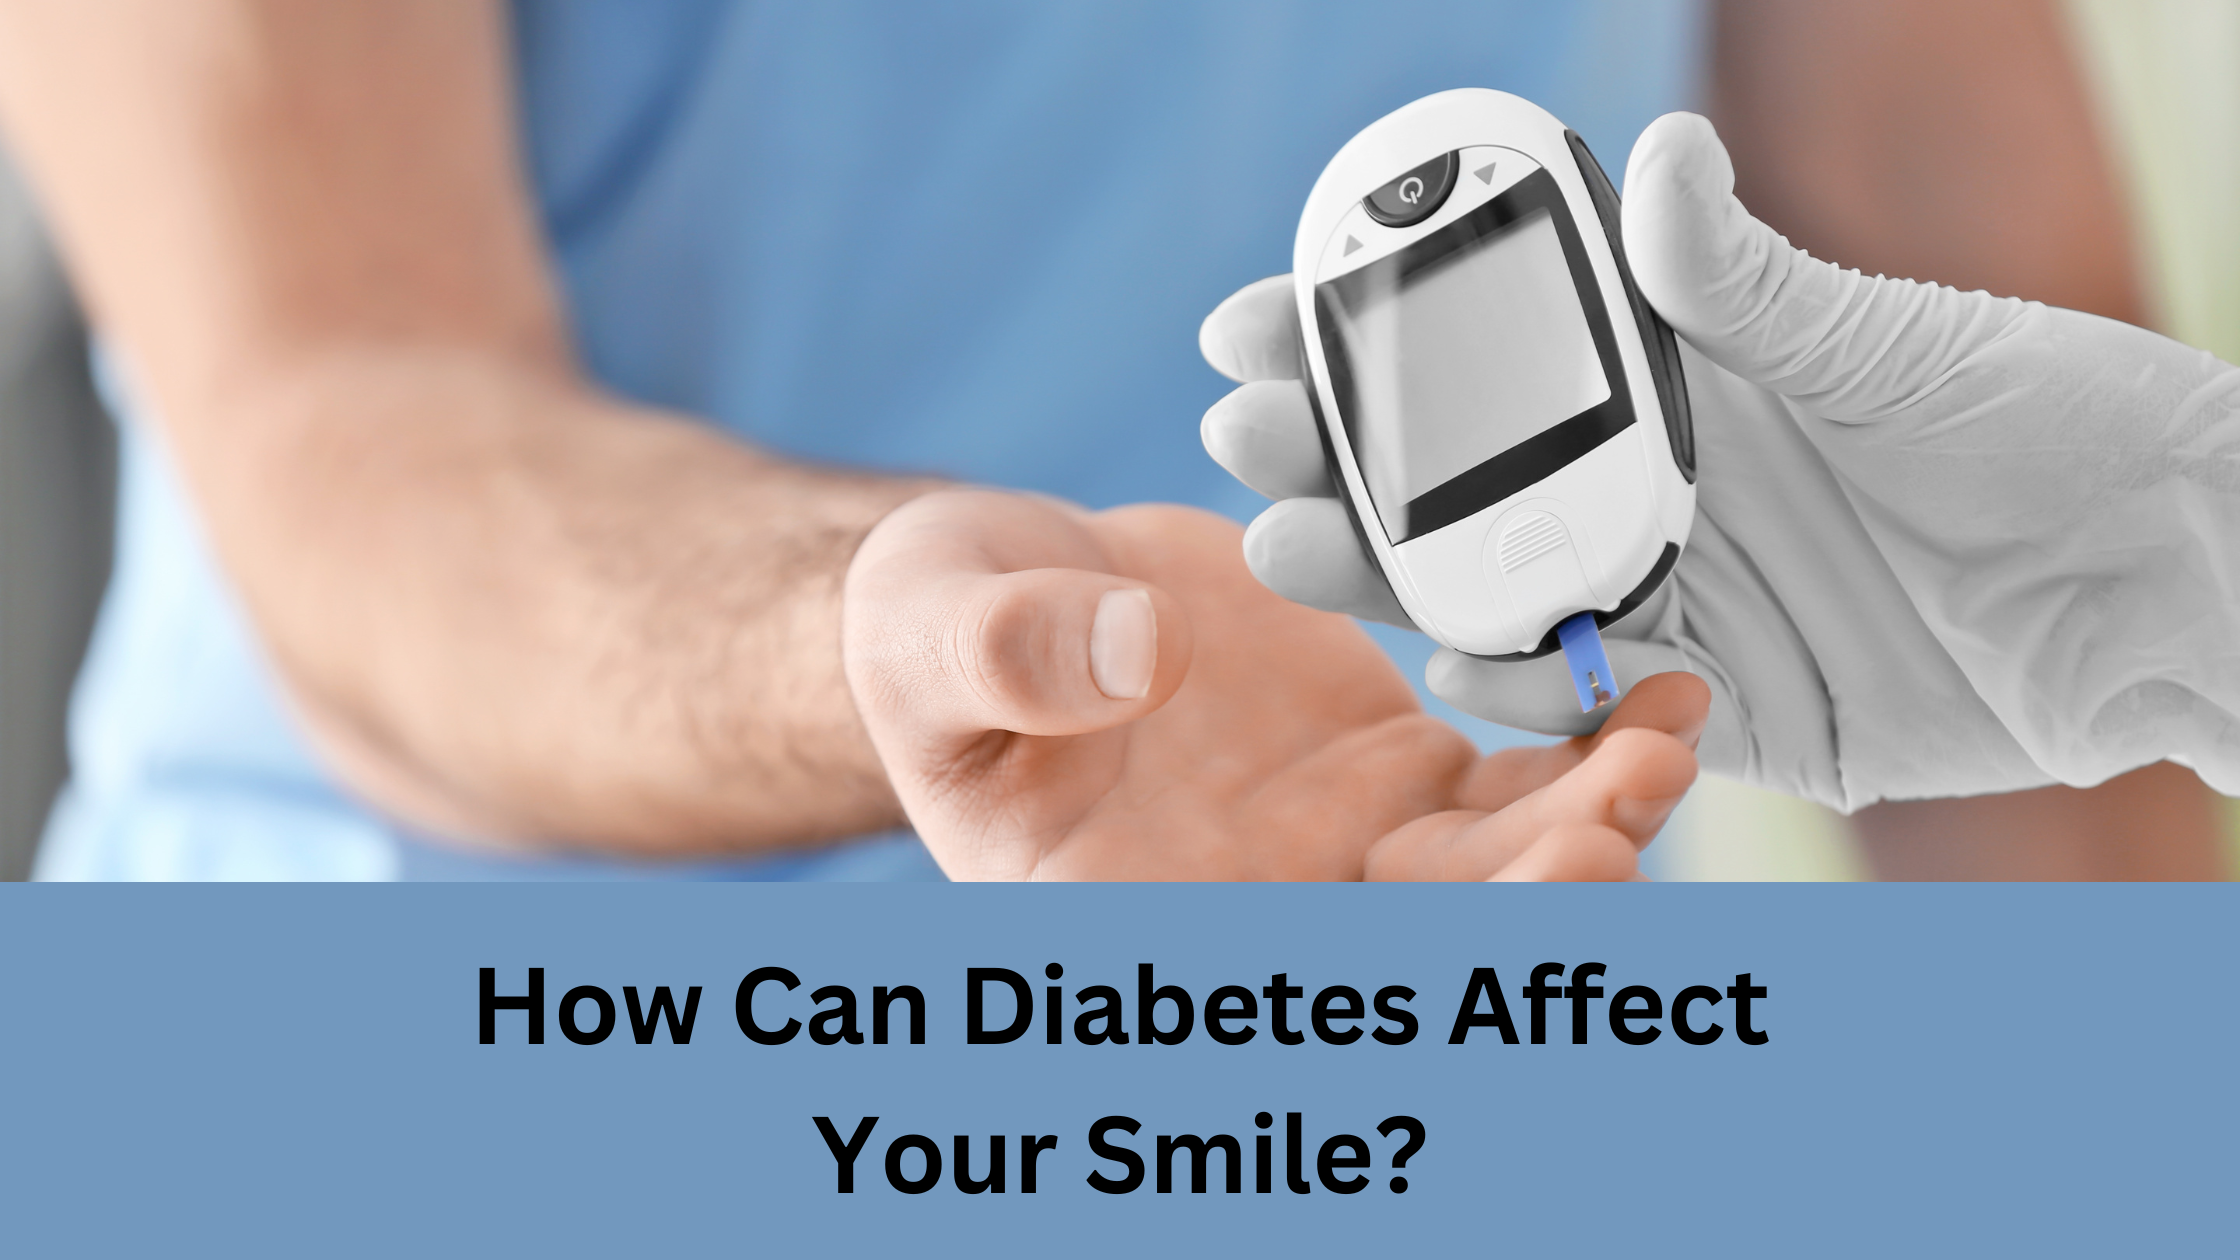 How Can Diabetes Affect Your Smile?